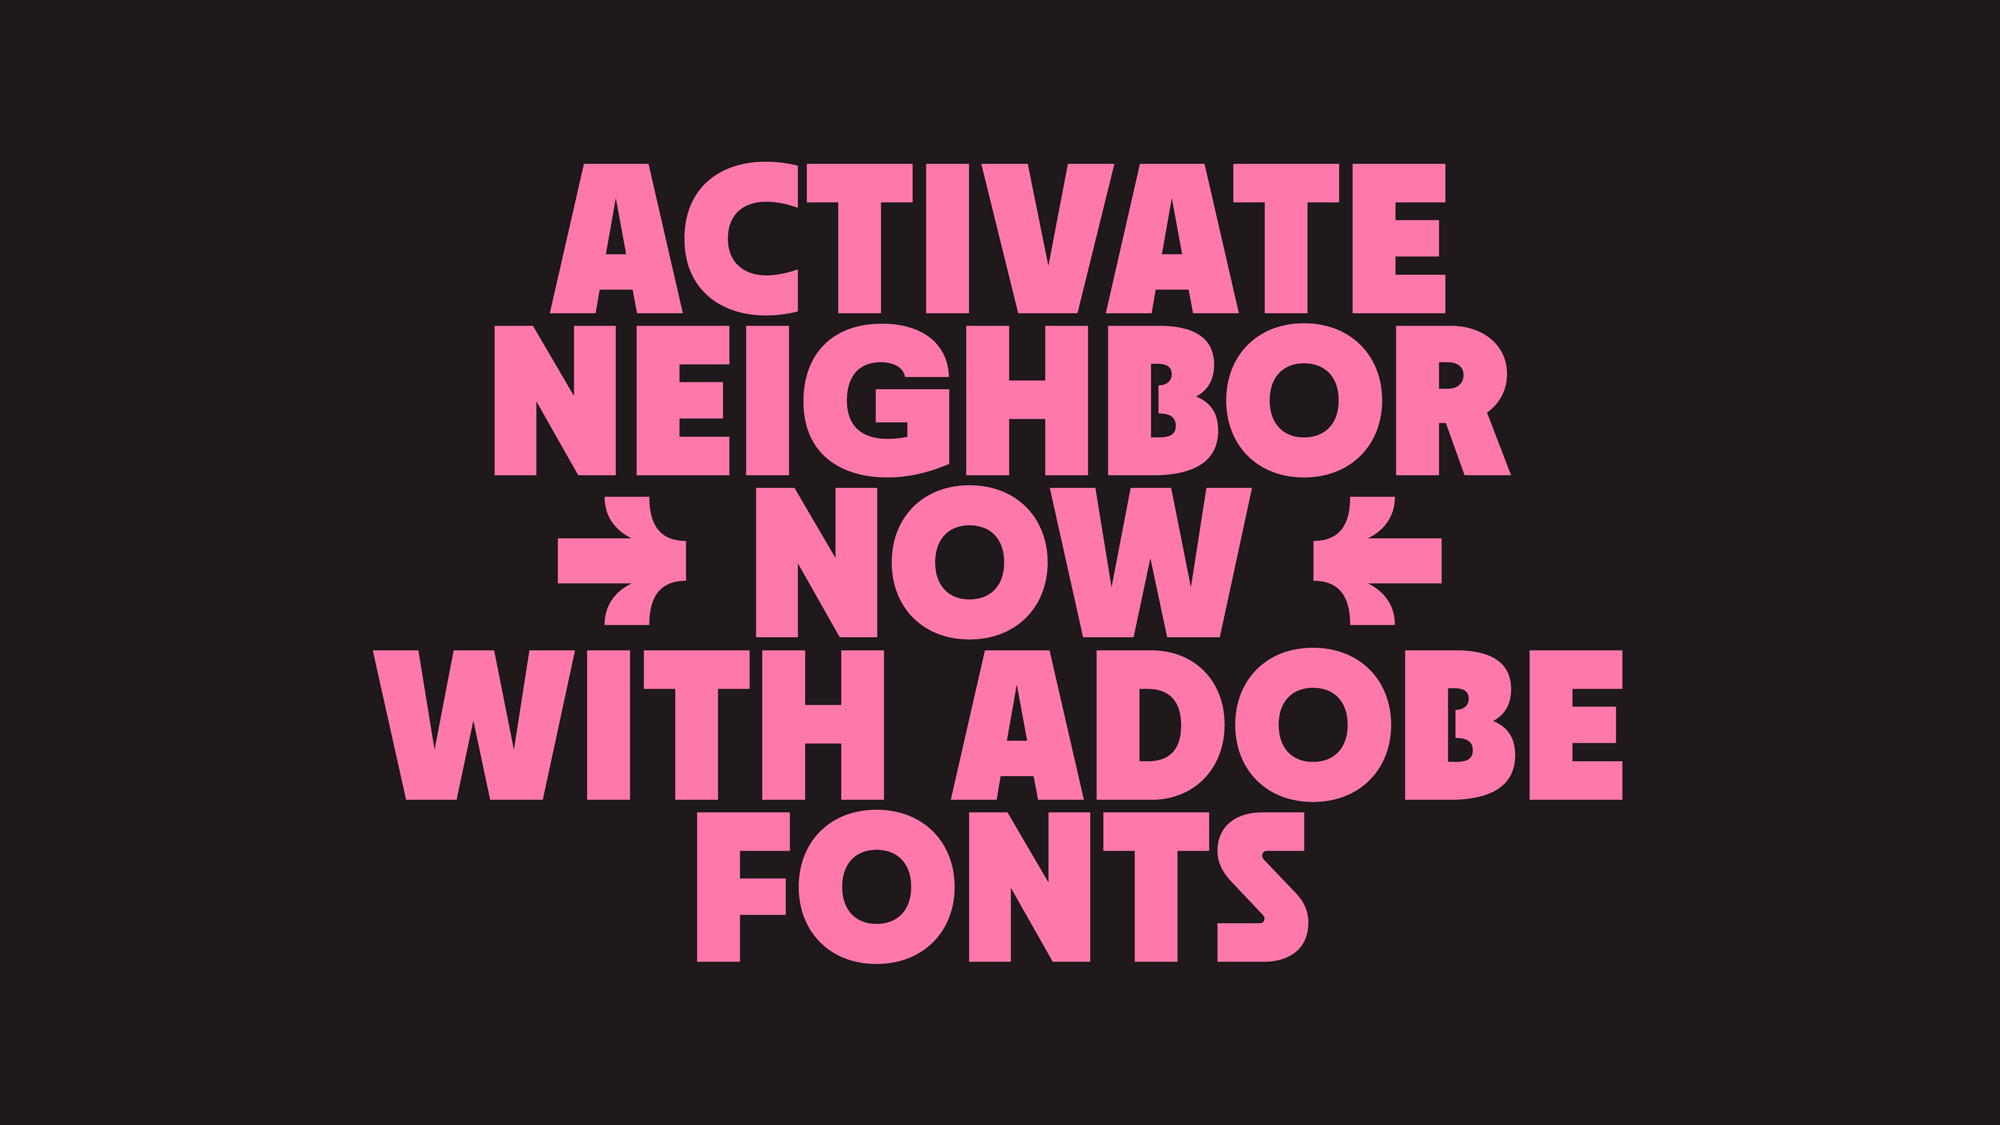 Activate Neighbor with Adobe Fonts adobe fonts design font fonts sans sans serif type typeface typography